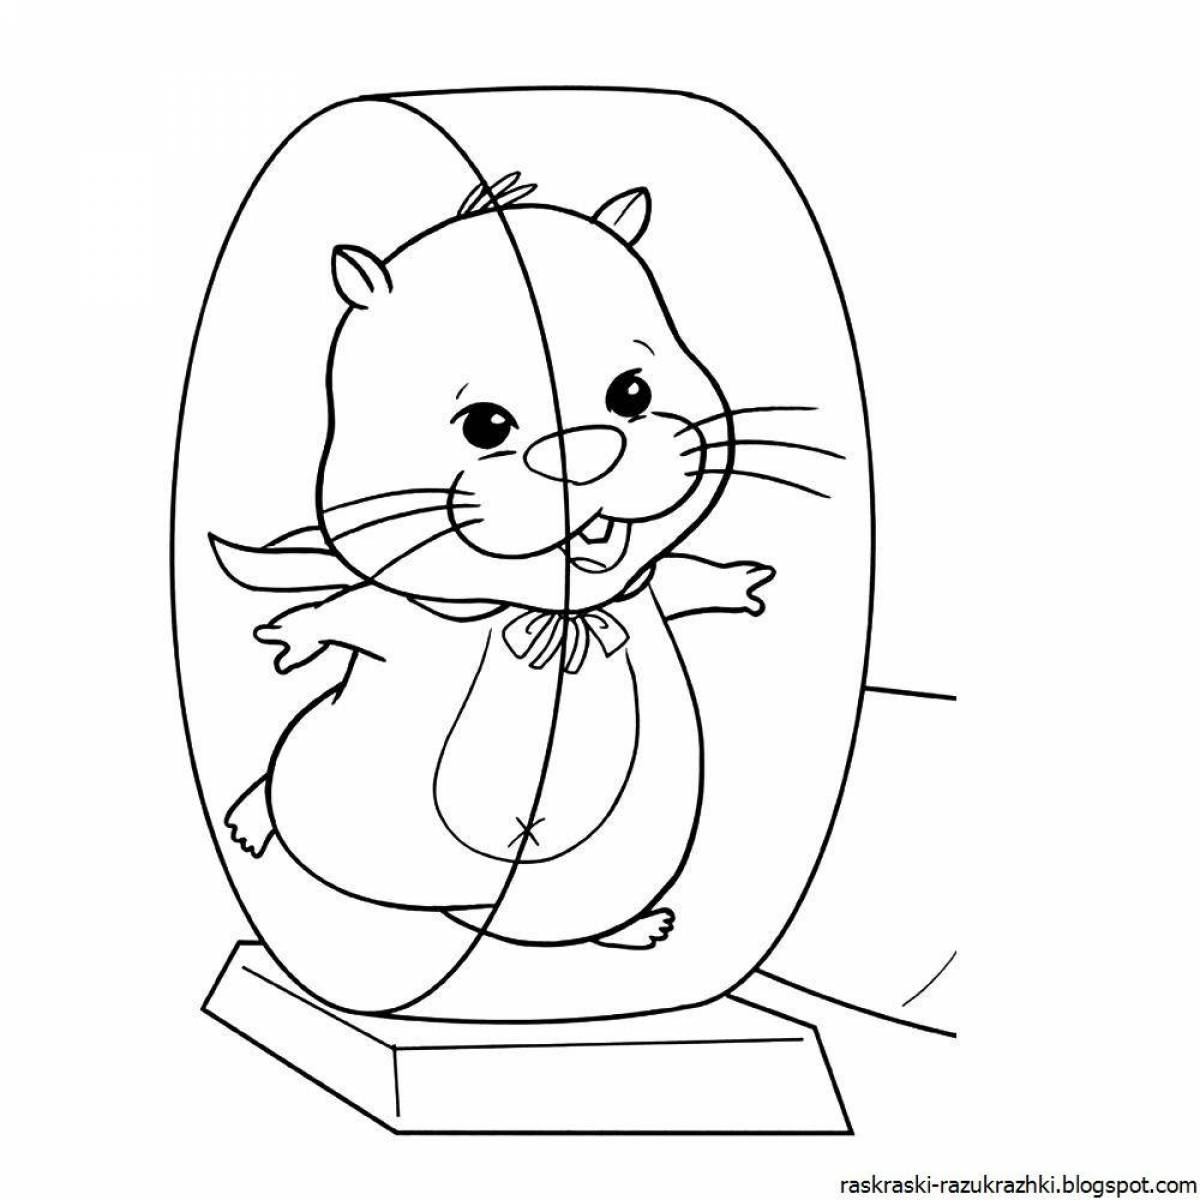 Crazy hamster coloring book for kids